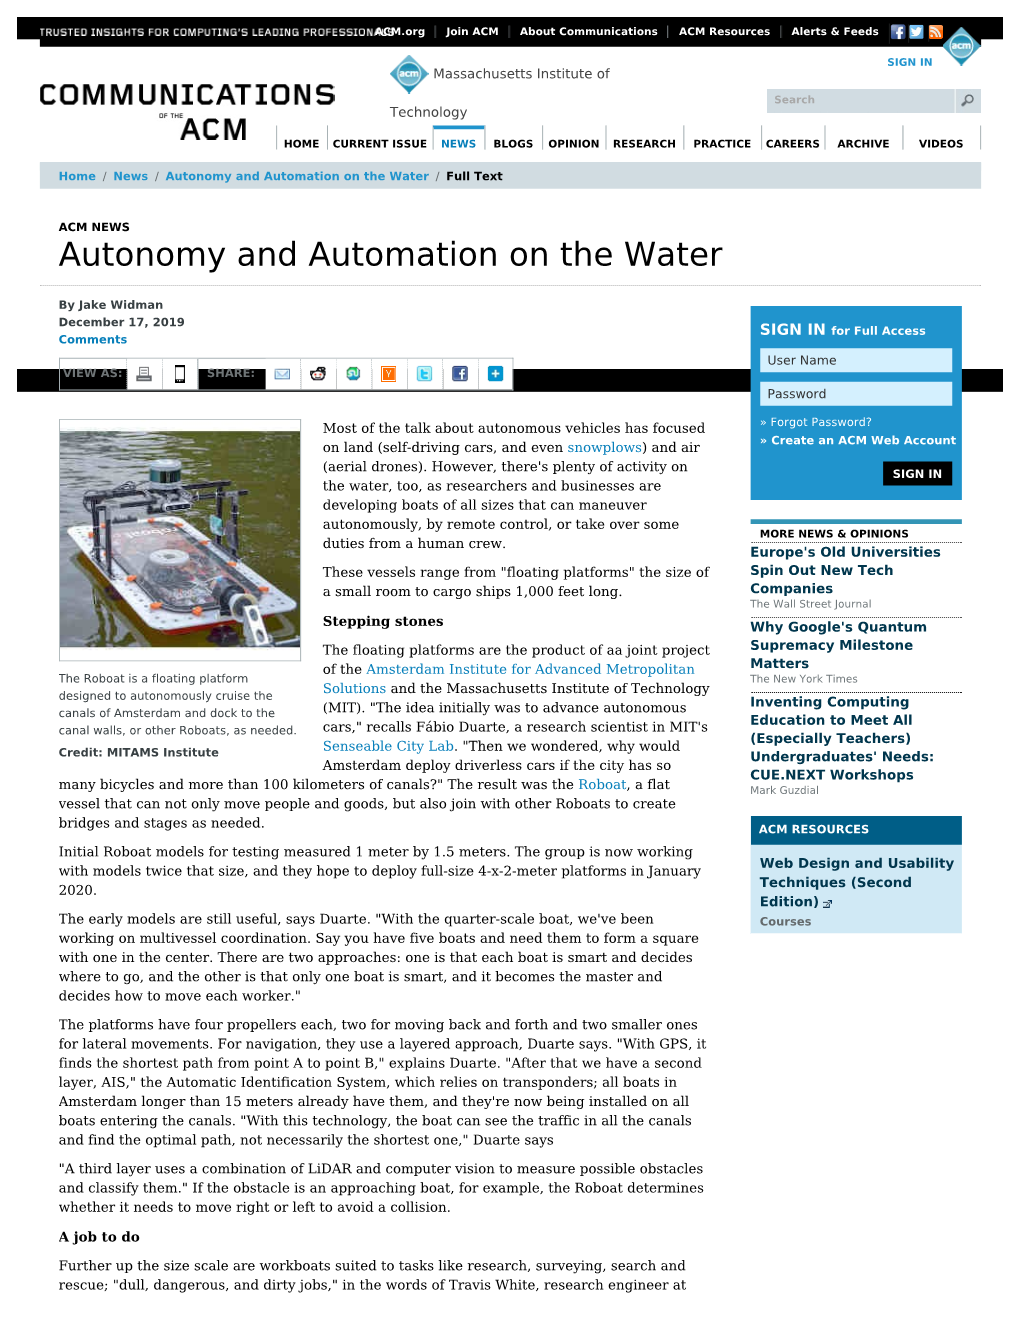 Autonomy and Automation on the Water / Full Text